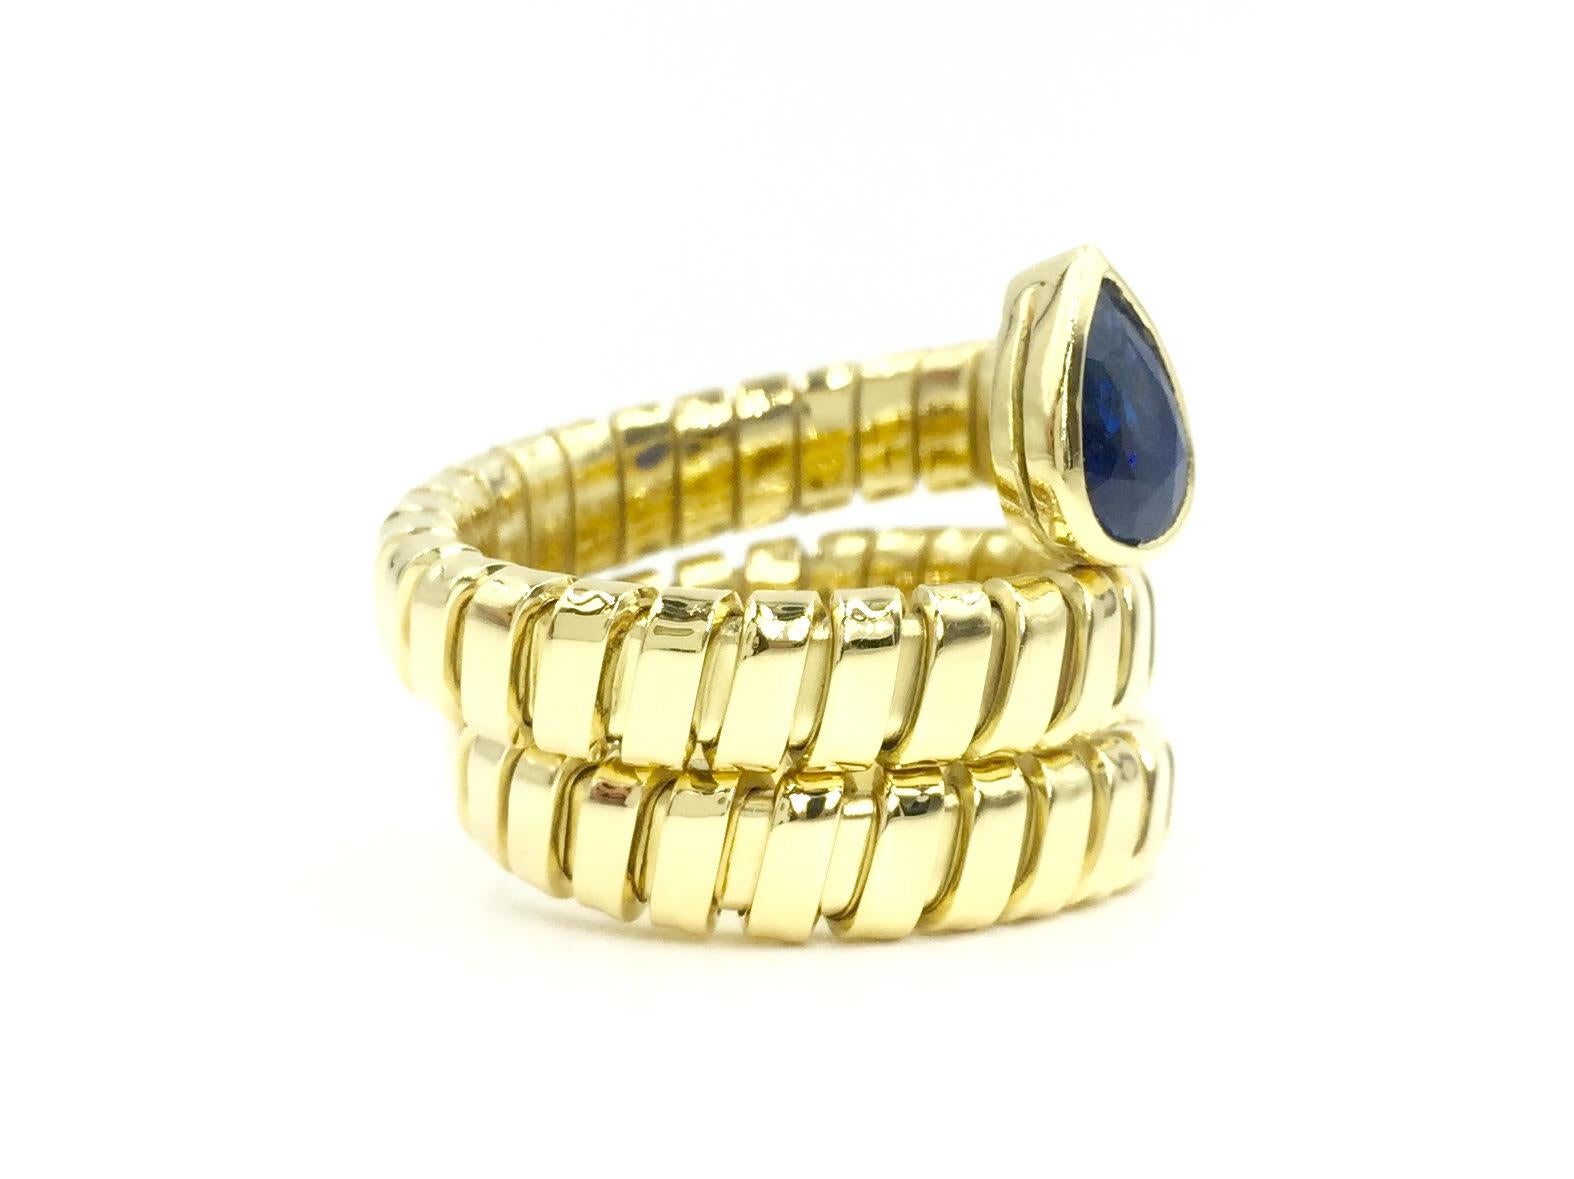 Italian made high polished 18 karat yellow gold flexible wrap ring featuring a beautiful 1.20 carat pear shape blue sapphire. Blue sapphire has a vibrant medium royal blue color.
Width of ring measures 19mm from point of pear to bottom of ring.